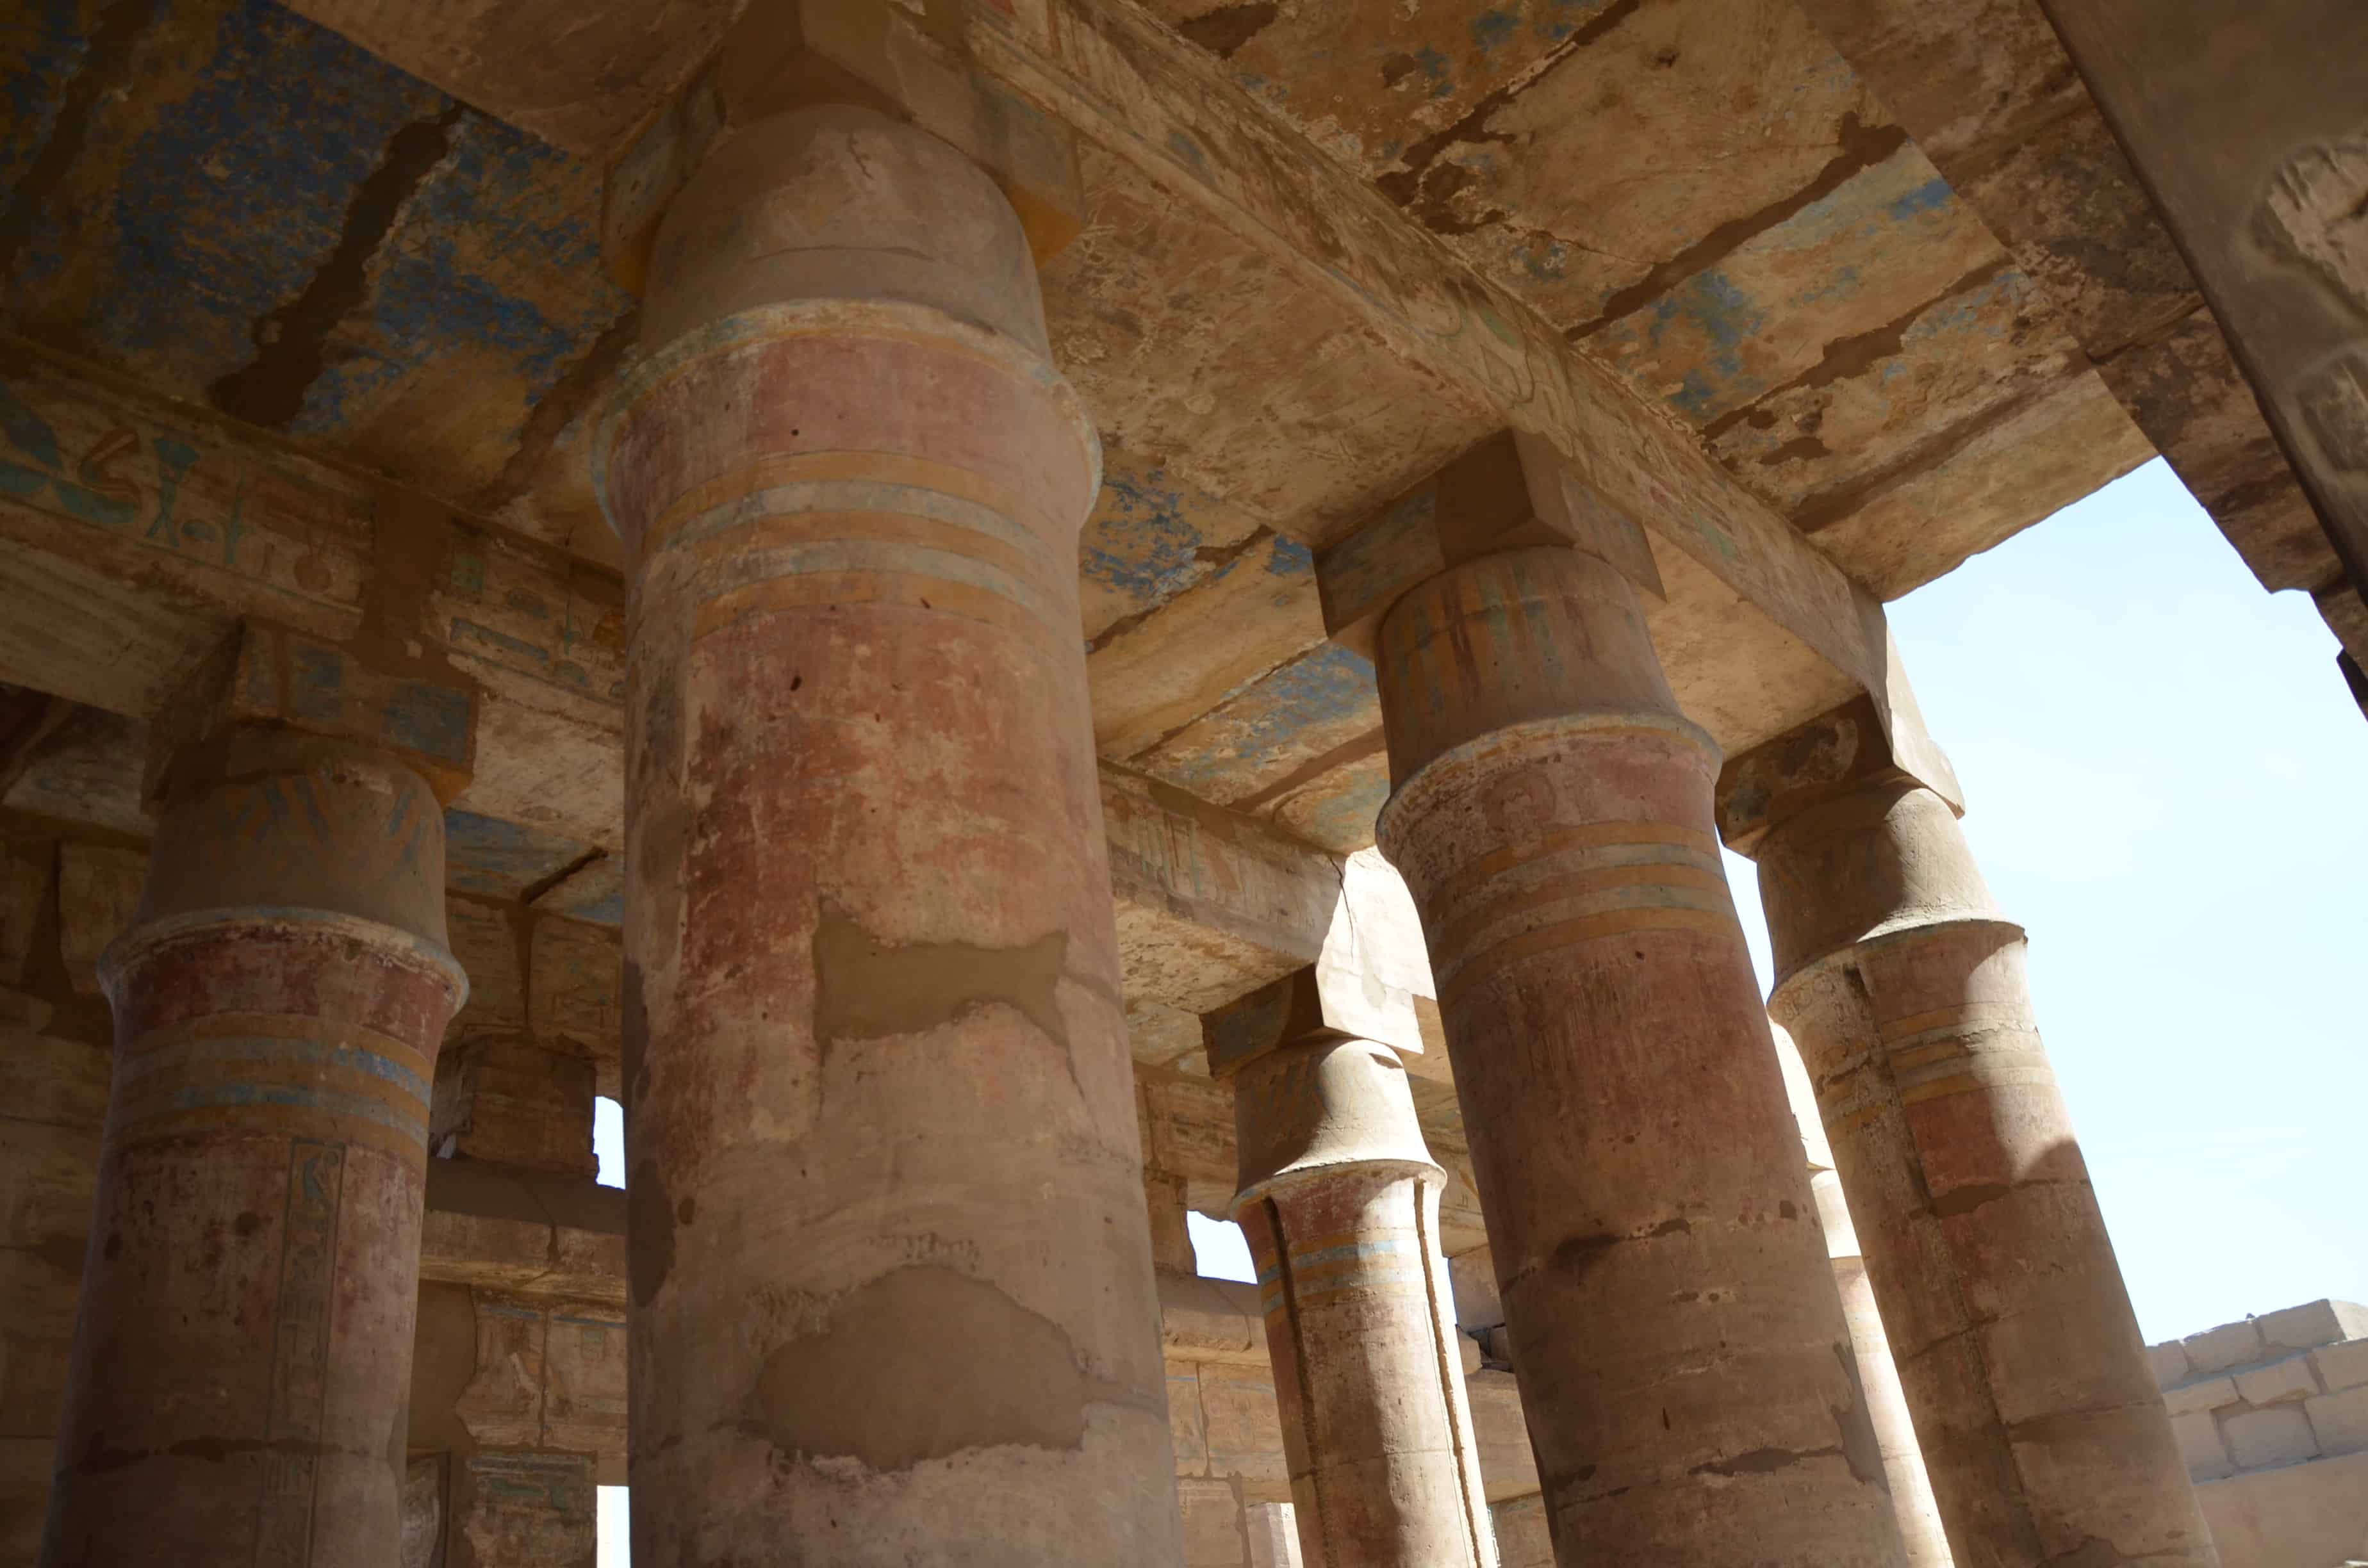 Columns in the Festival Temple of Tuthmosis III